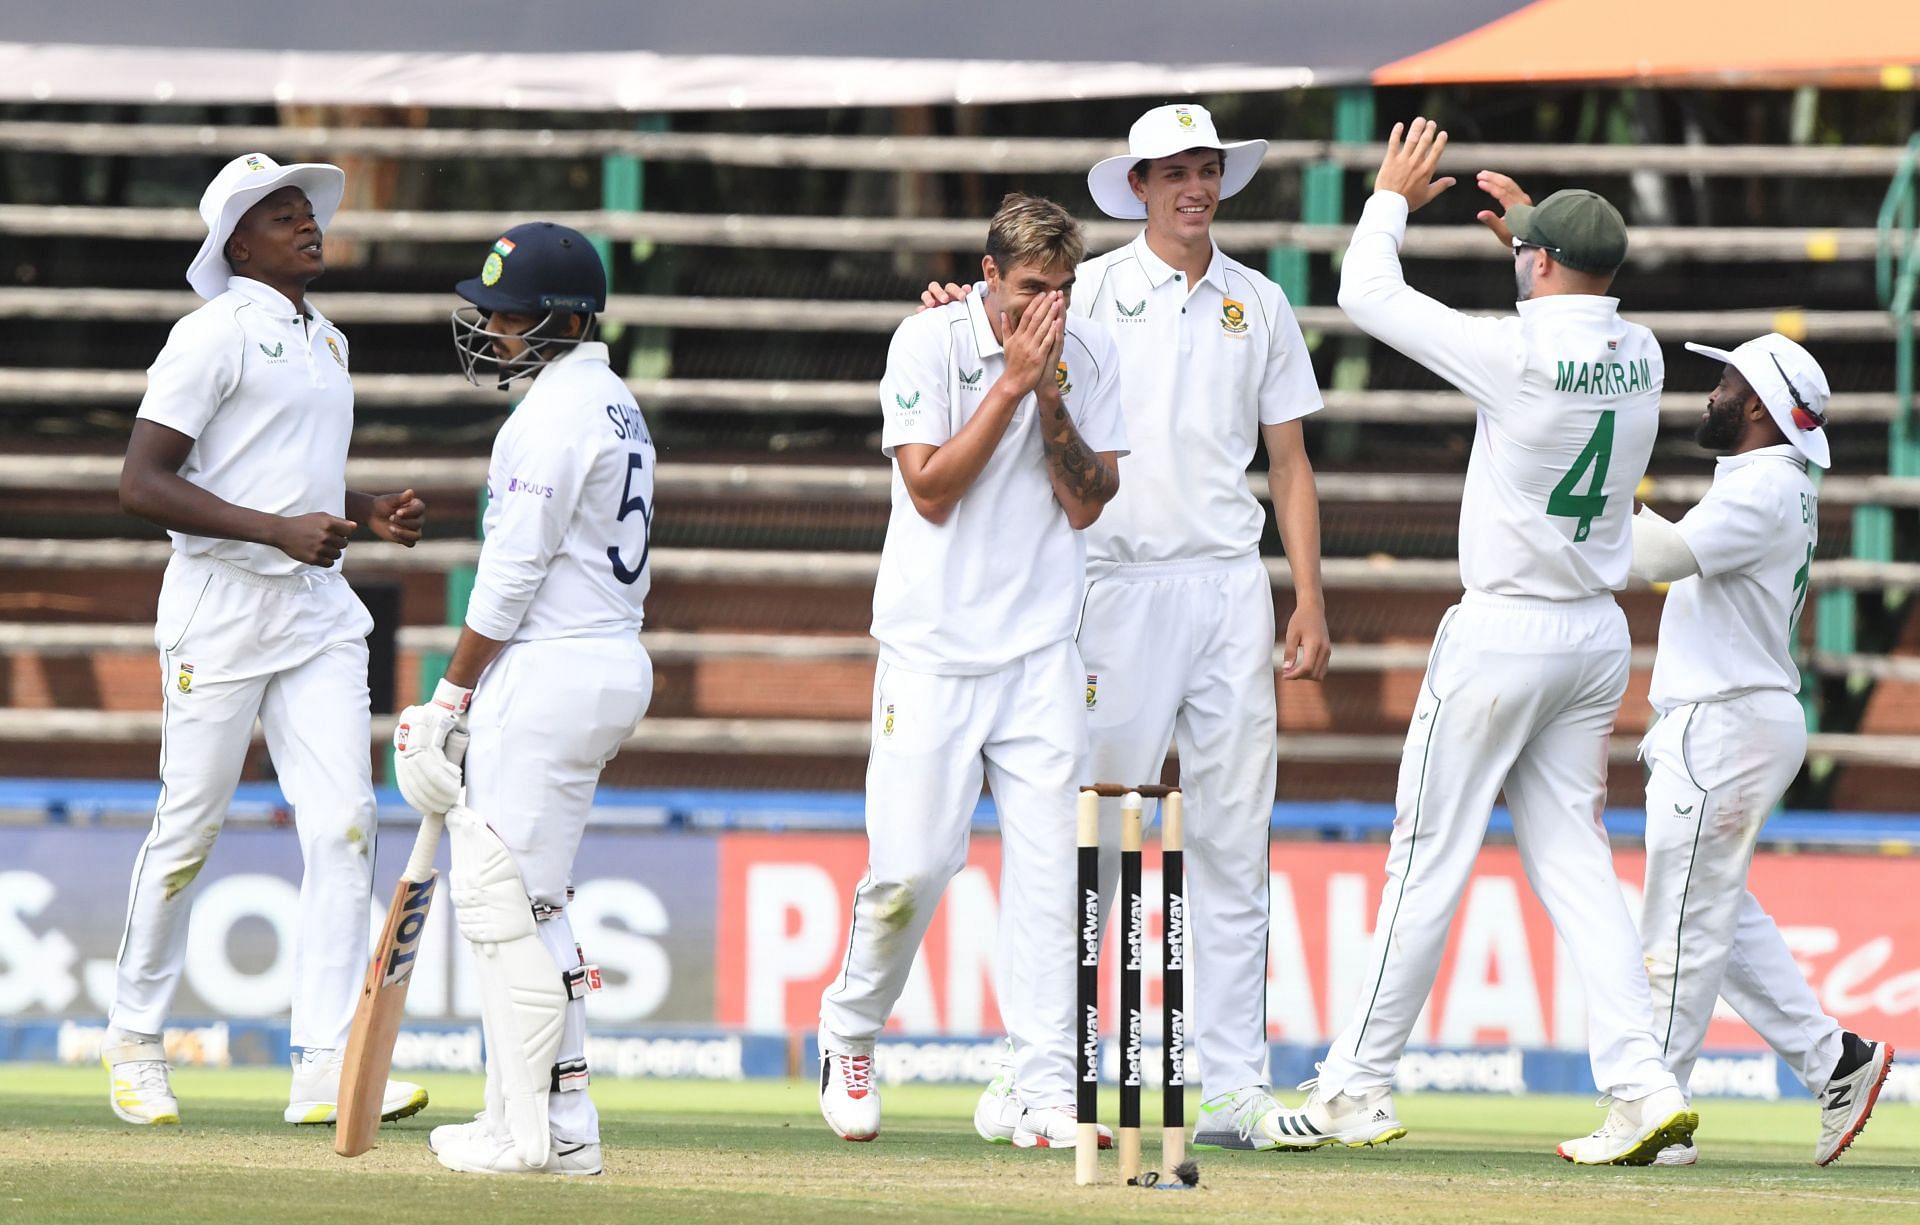 Duanne Olivier was superb in the second India vs South Africa Test